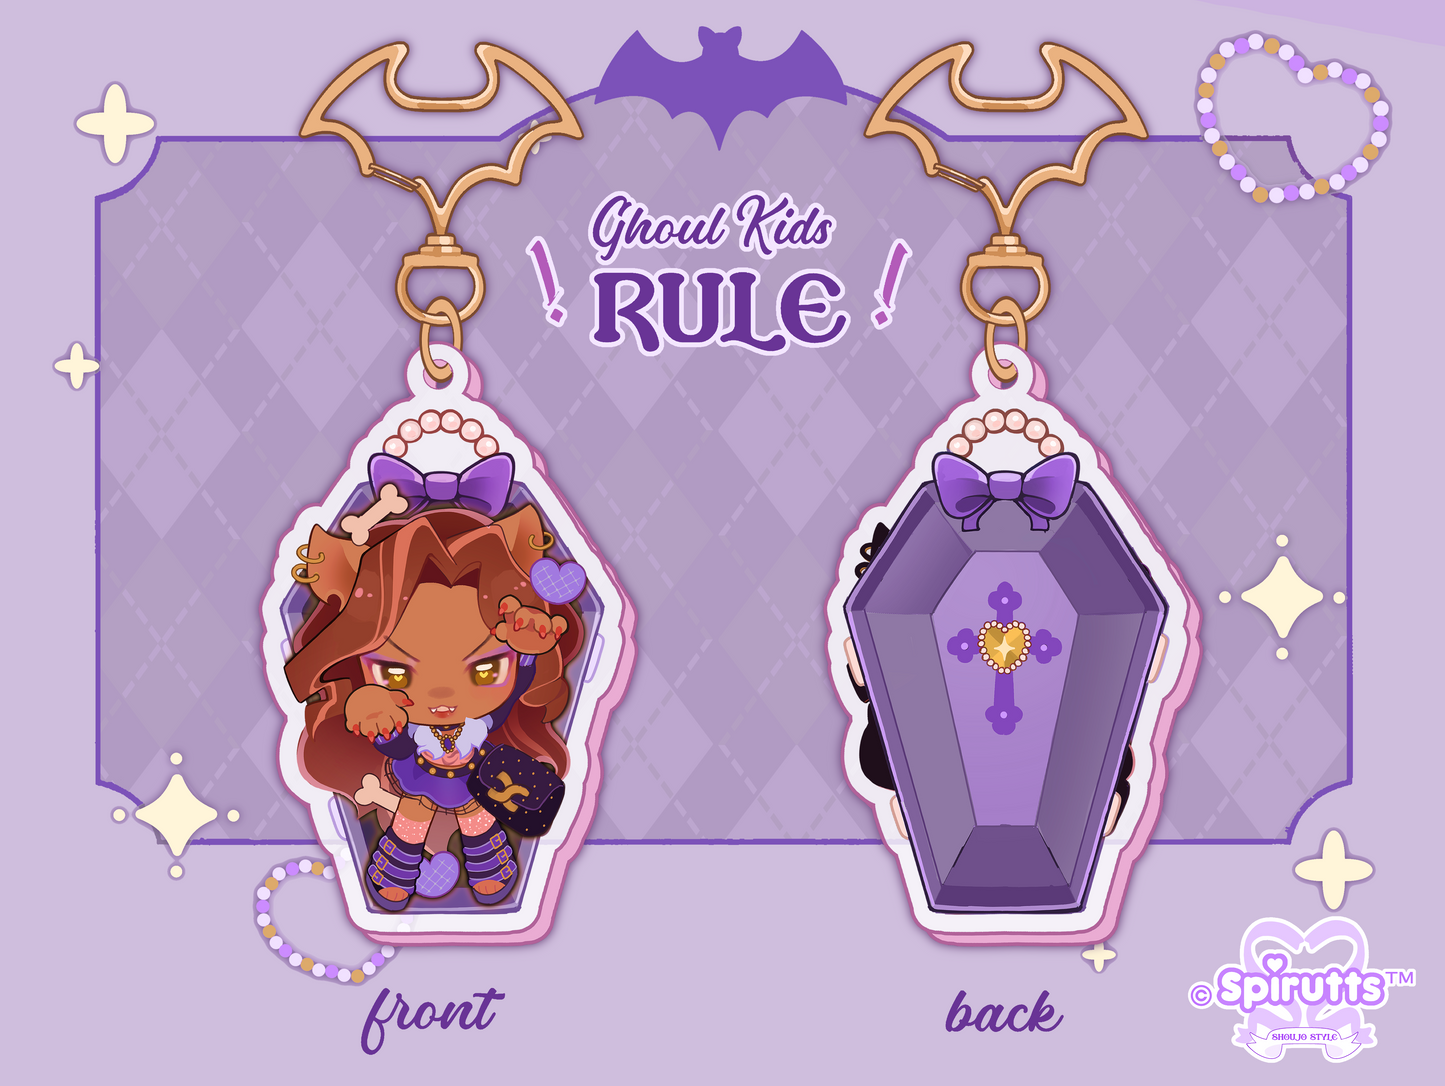 KEYCHAIN(S) - Ghoul gals!  - Double-sided acrylic/Bat-shaped Gold Chain/Charm